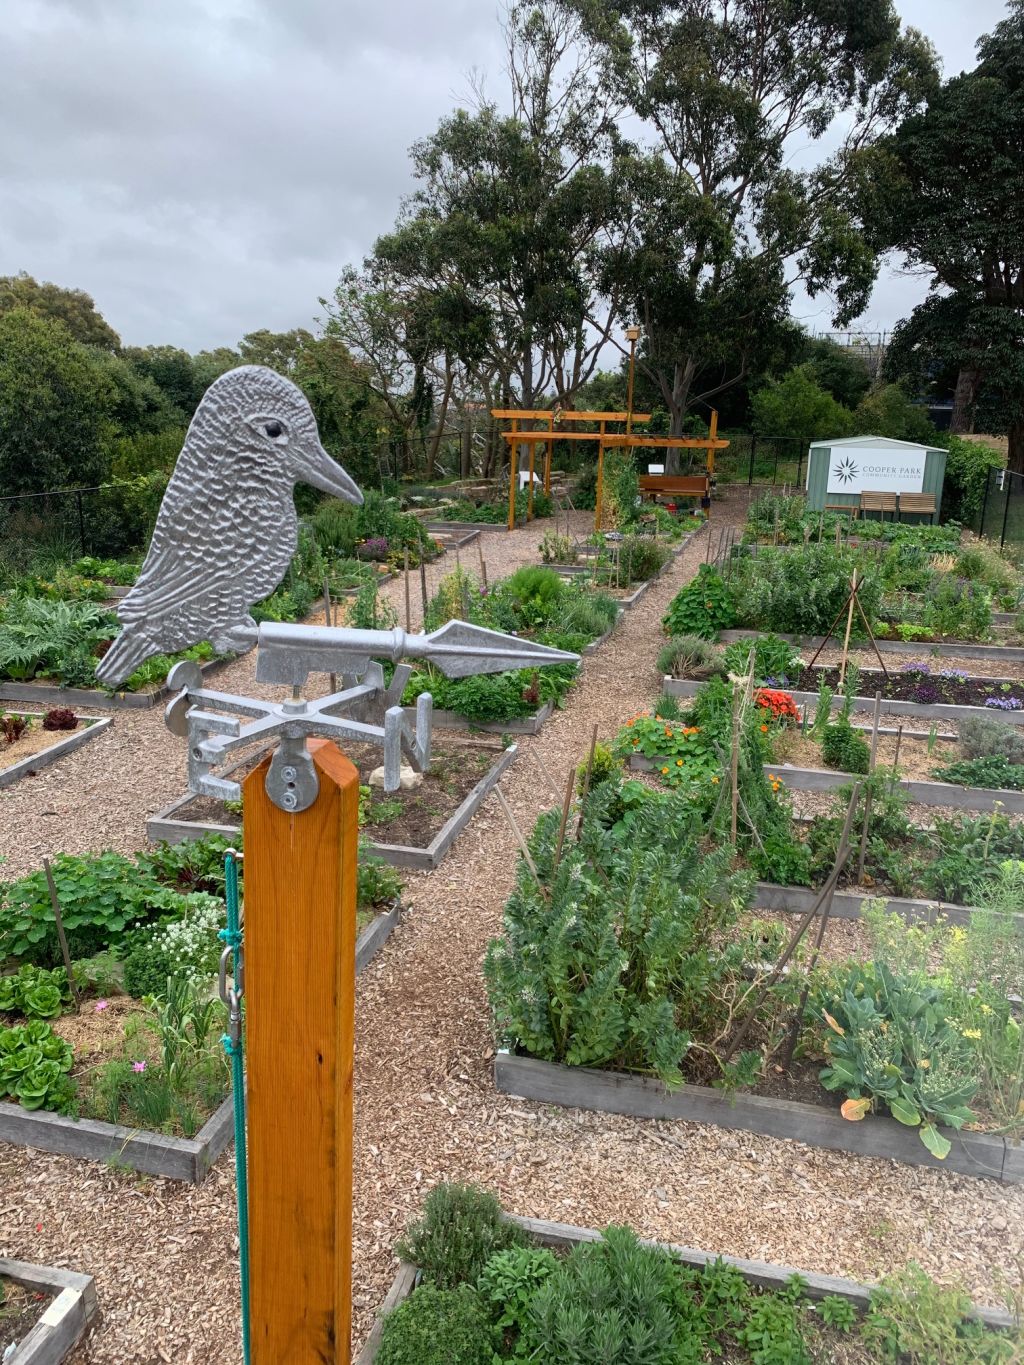 Cooper Park Community Garden in Bellevue Hill rents out private garden plots for $120 a year.